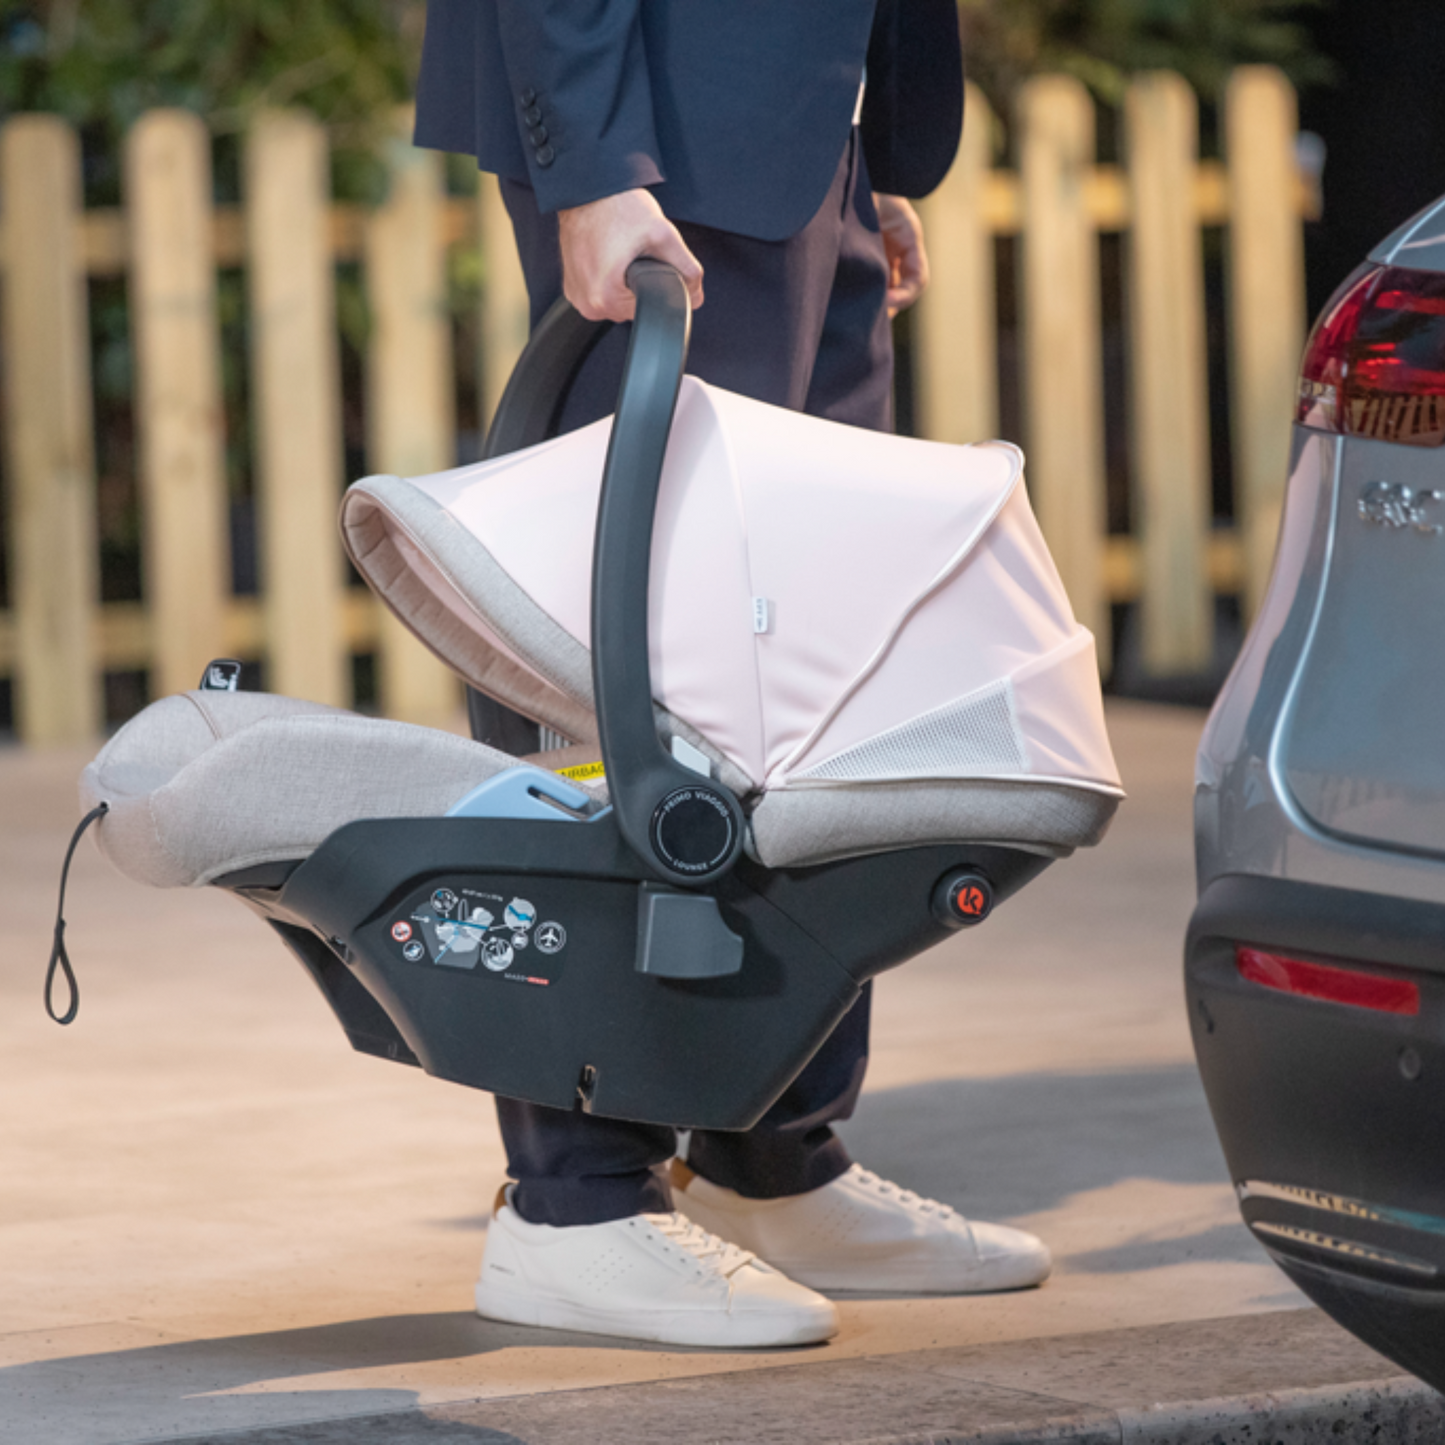 Peg Perego Veloce 3 in 1 I Size Travel System Mon Amour